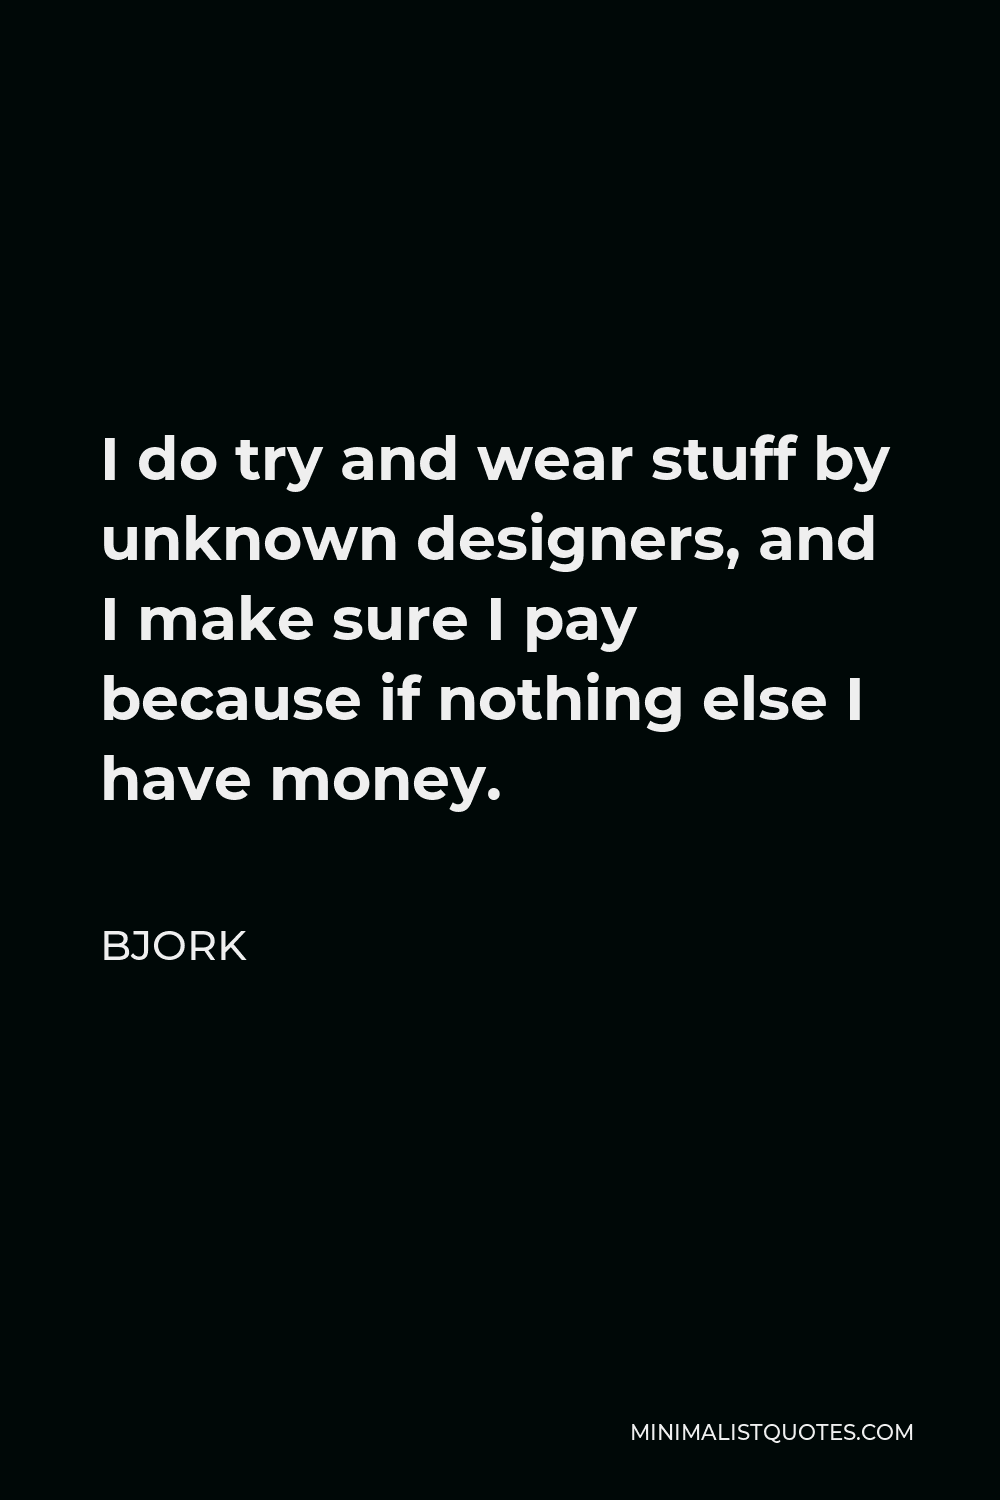 Bjork Quote - I do try and wear stuff by unknown designers, and I make sure I pay because if nothing else I have money.